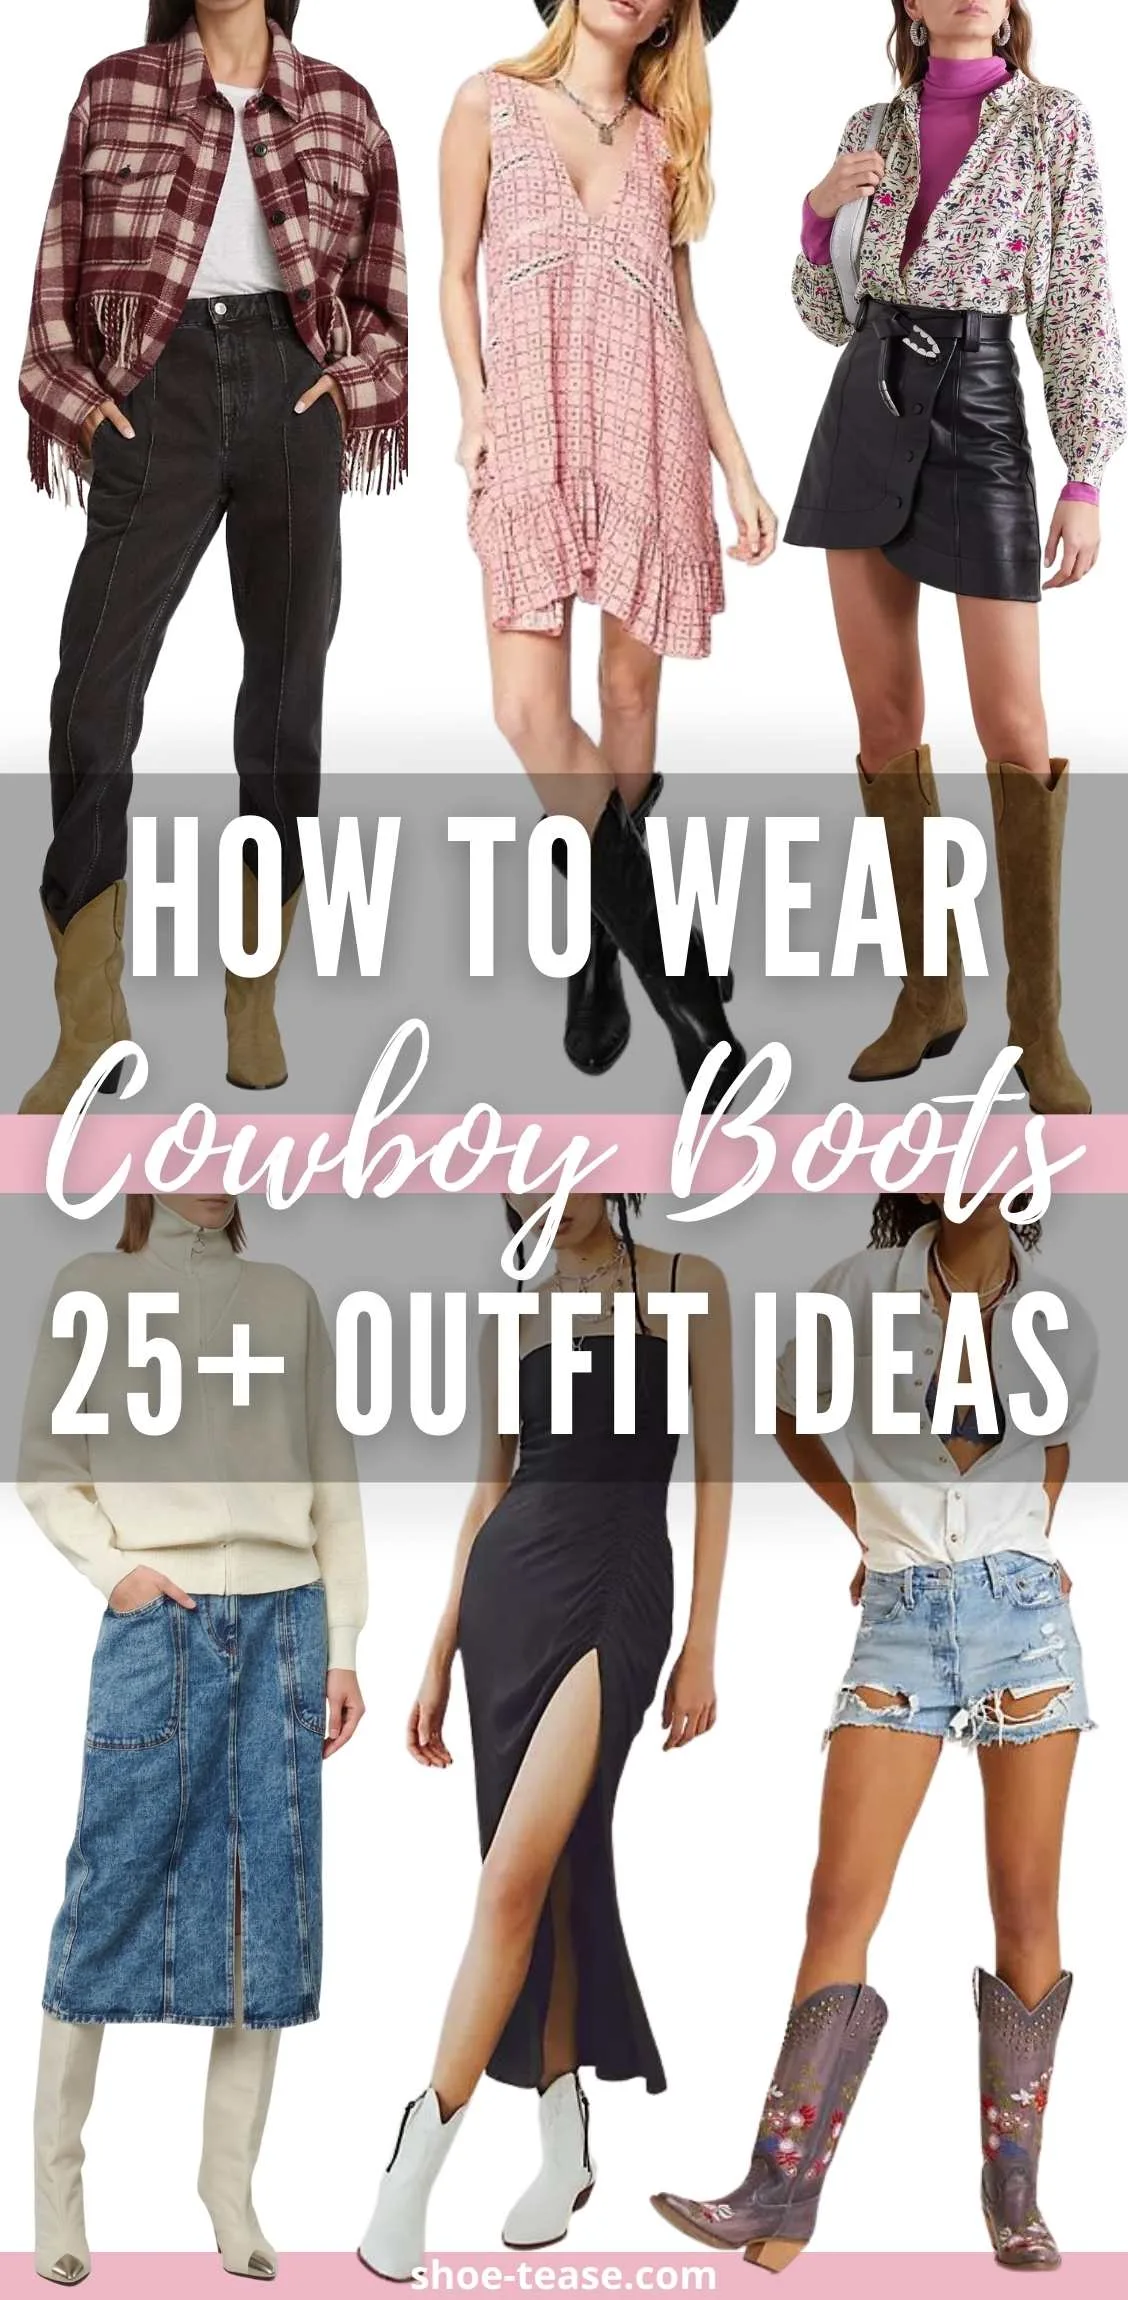 Collage of 6 women wearing different cowboy boots outfits under text reading how to wear cowboy boots 25 plus outfit ideas.